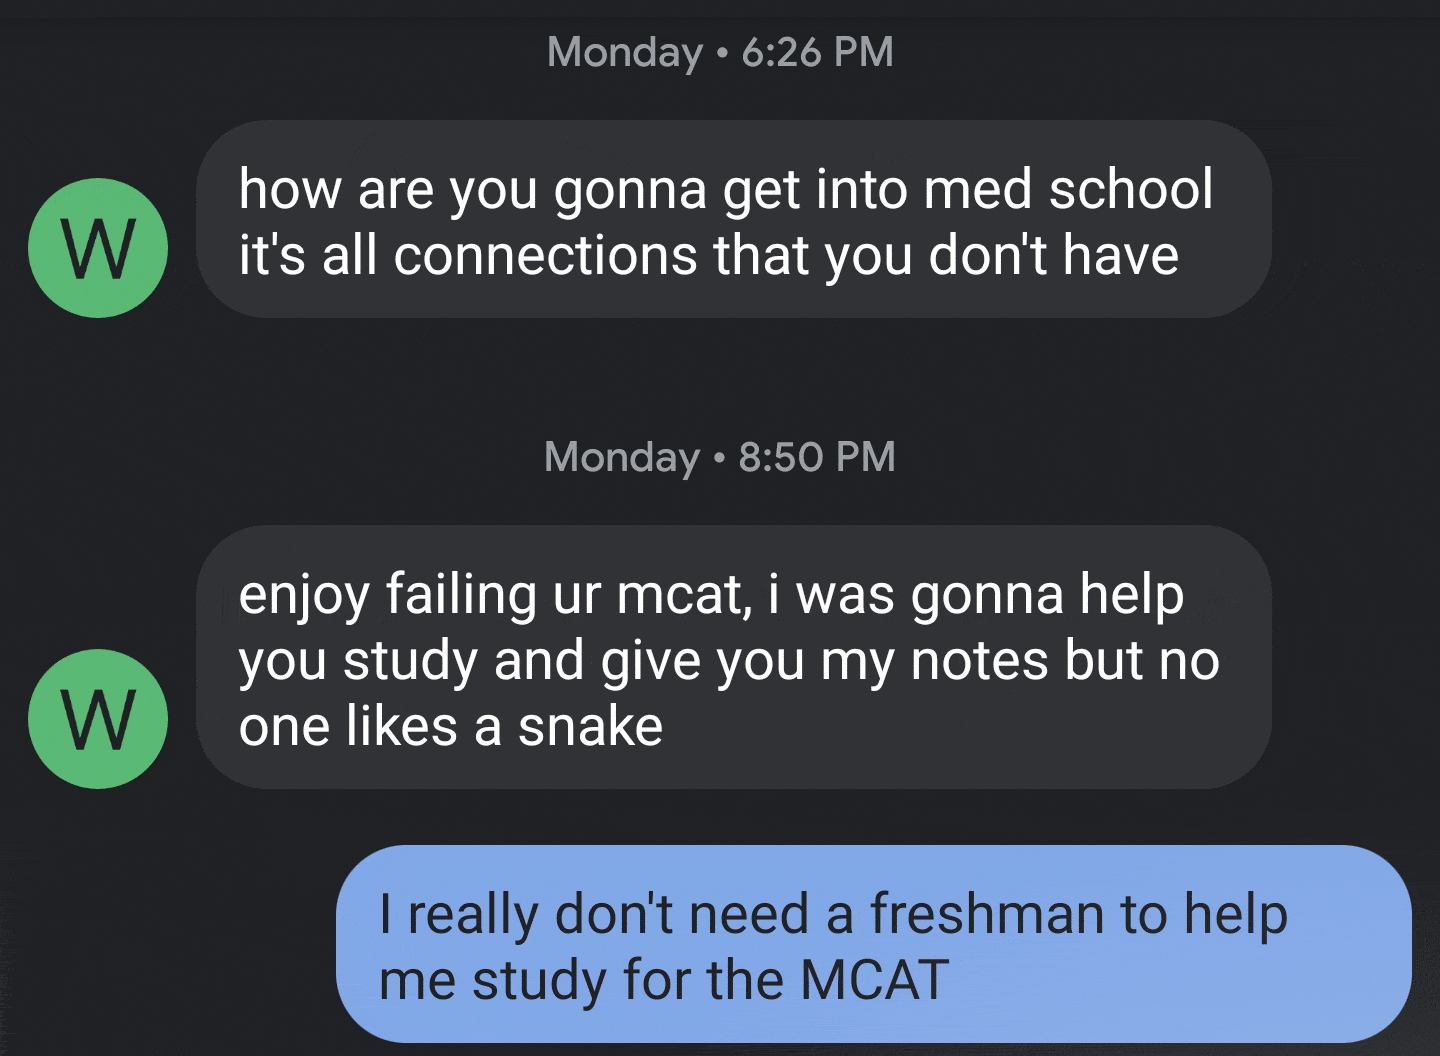 multimedia - Monday W how are you gonna get into med school it's all connections that you don't have Monday enjoy failing ur mcat, i was gonna help you study and give you my notes but no one a snake W I really don't need a freshman to help me study for th